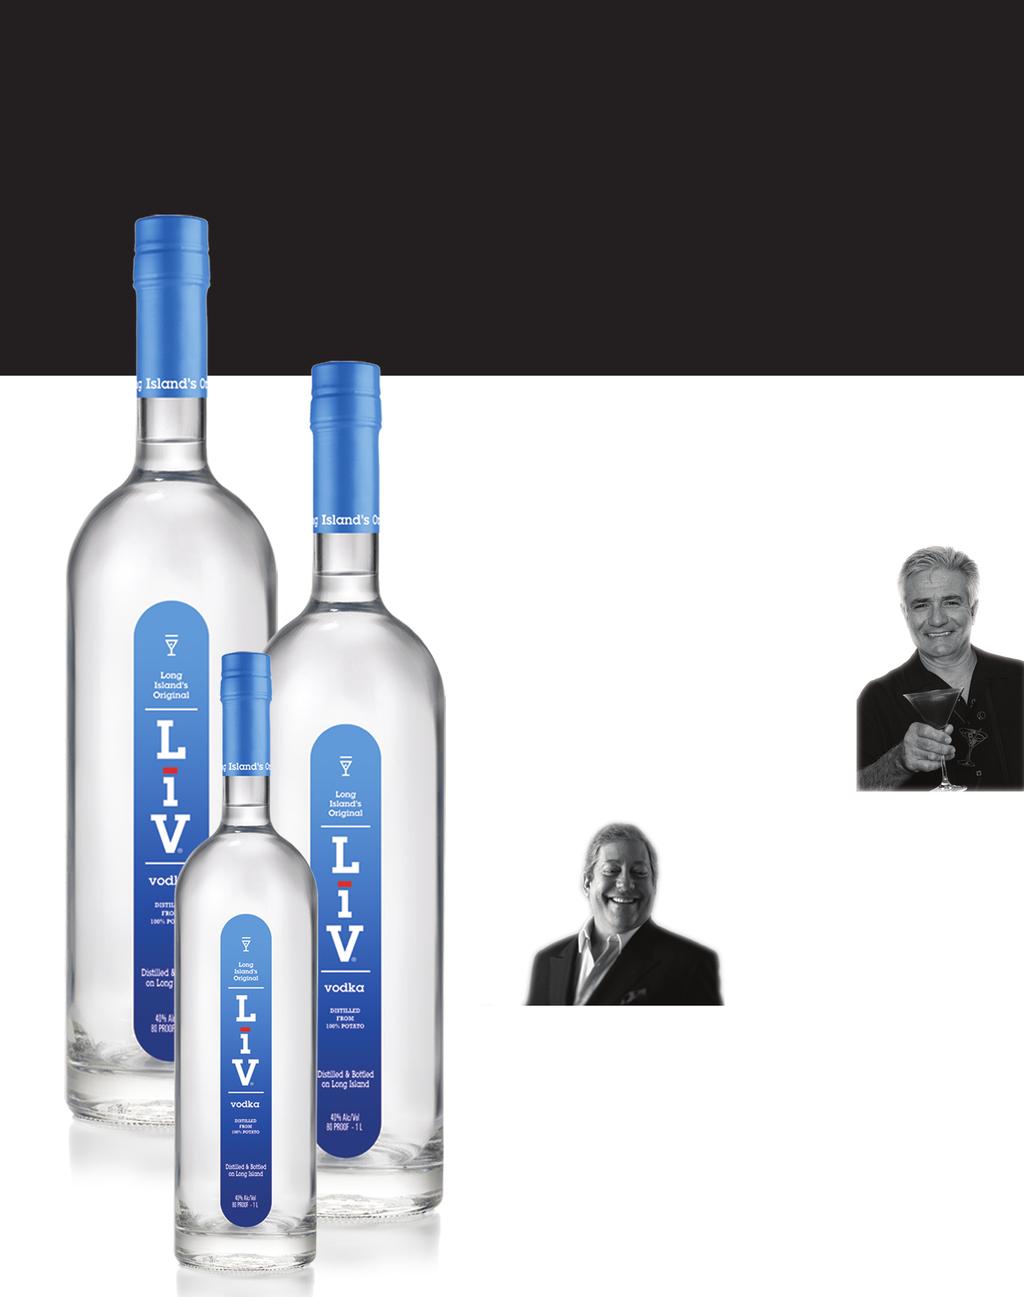 our product LiV Artisinal Vodka Ultra Premium 00% Potato Vodka Exceptionally fresh, crisp and LiVely with a creamy buttery feel on the palate.